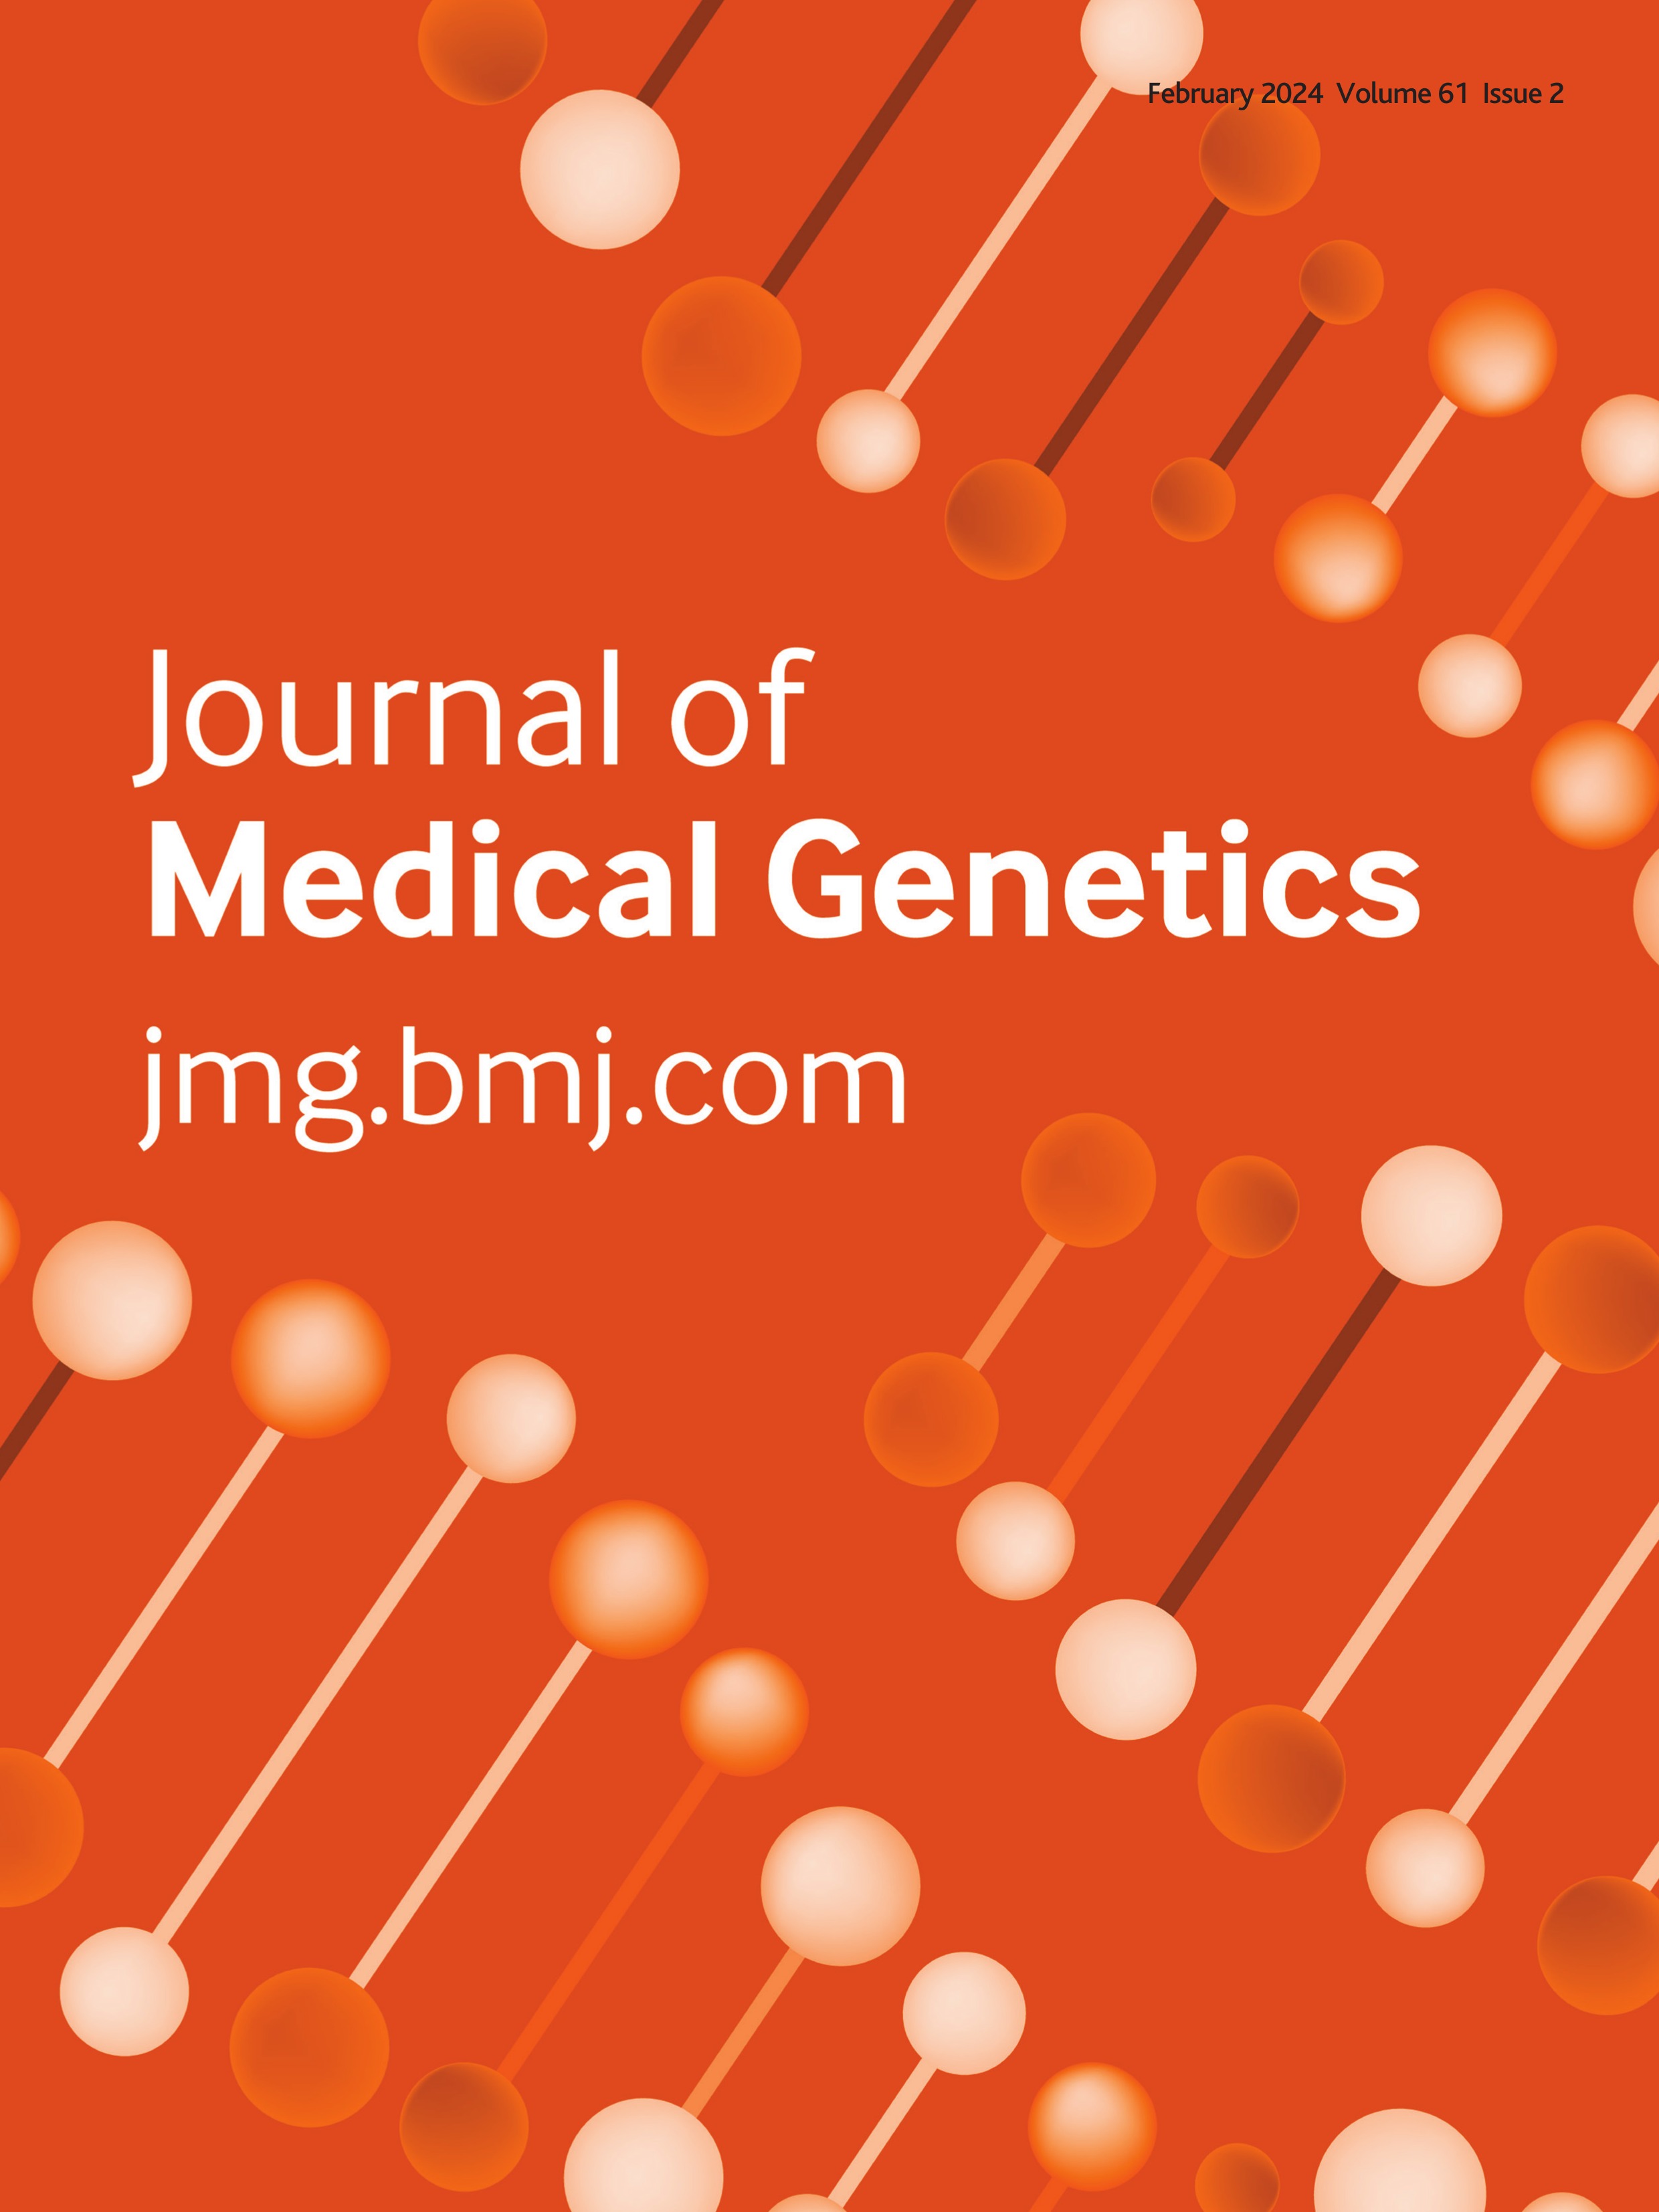 Further characterisation of ARX-related disorders in females due to inherited or de novo variants